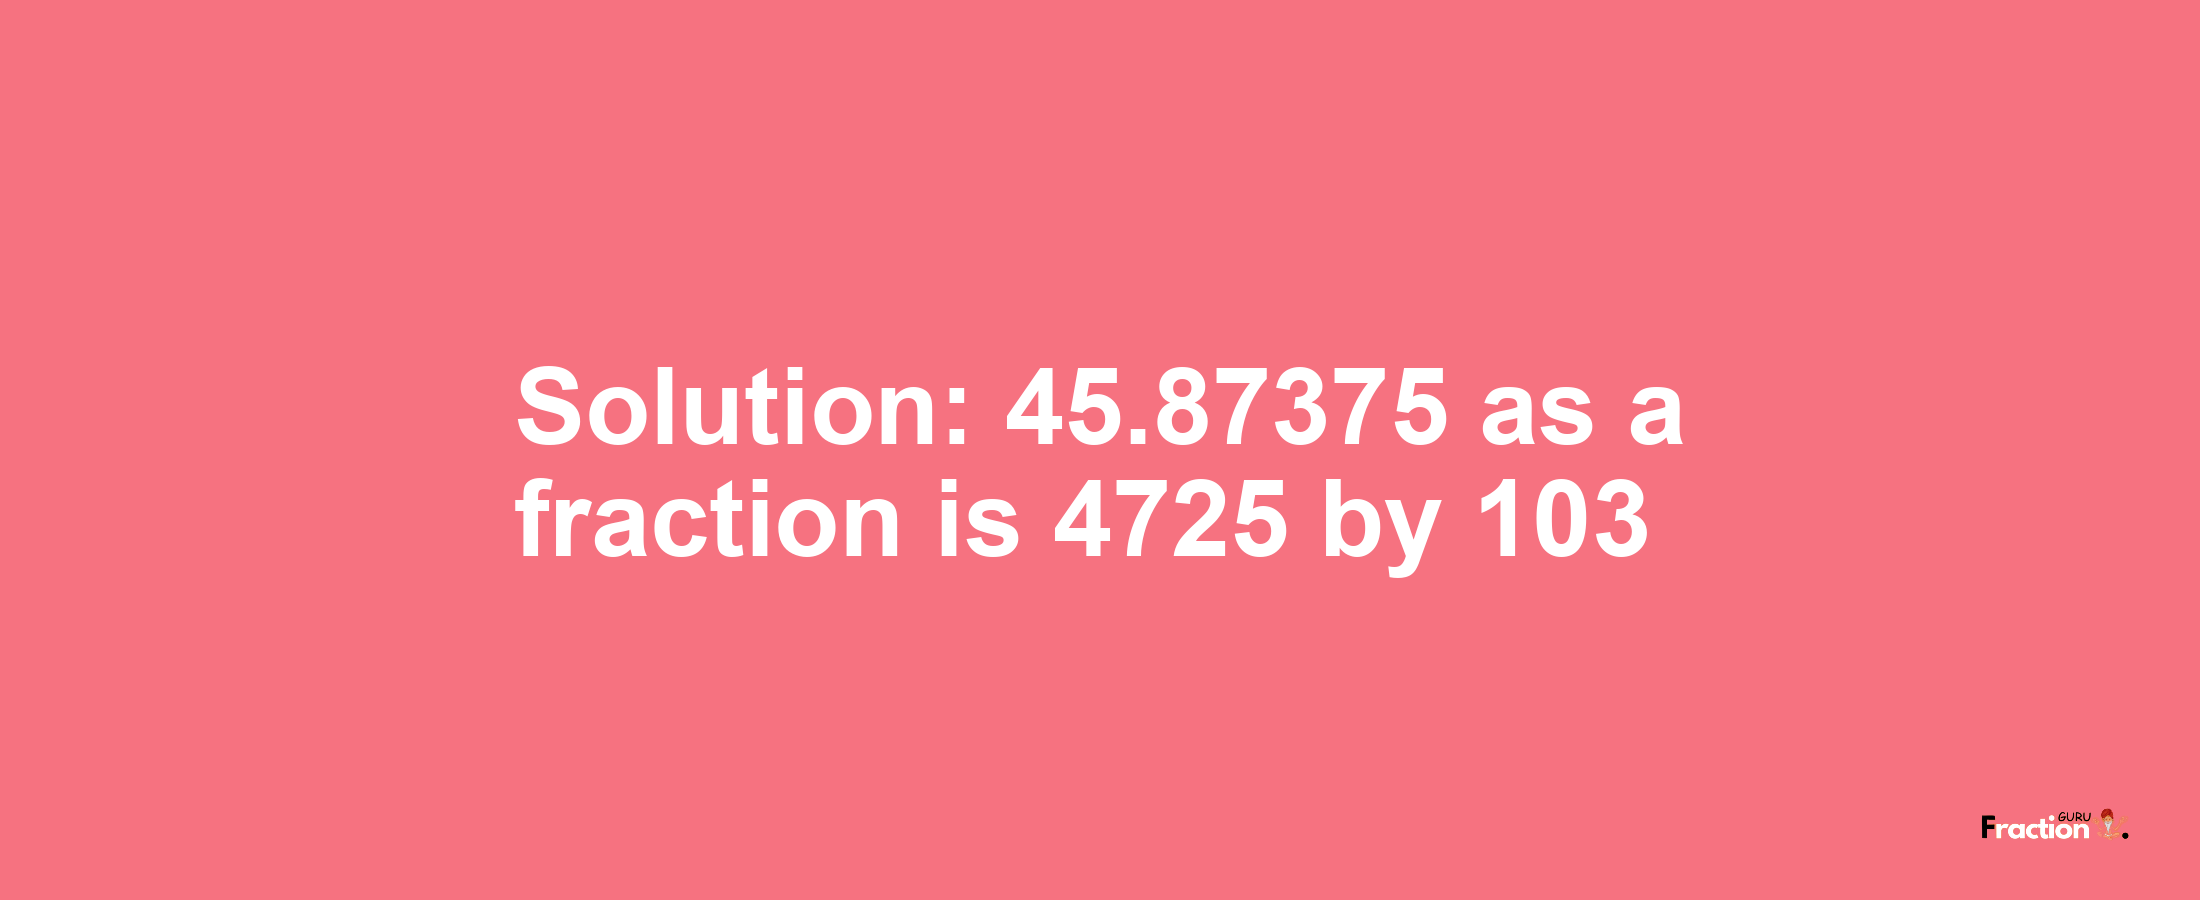 Solution:45.87375 as a fraction is 4725/103